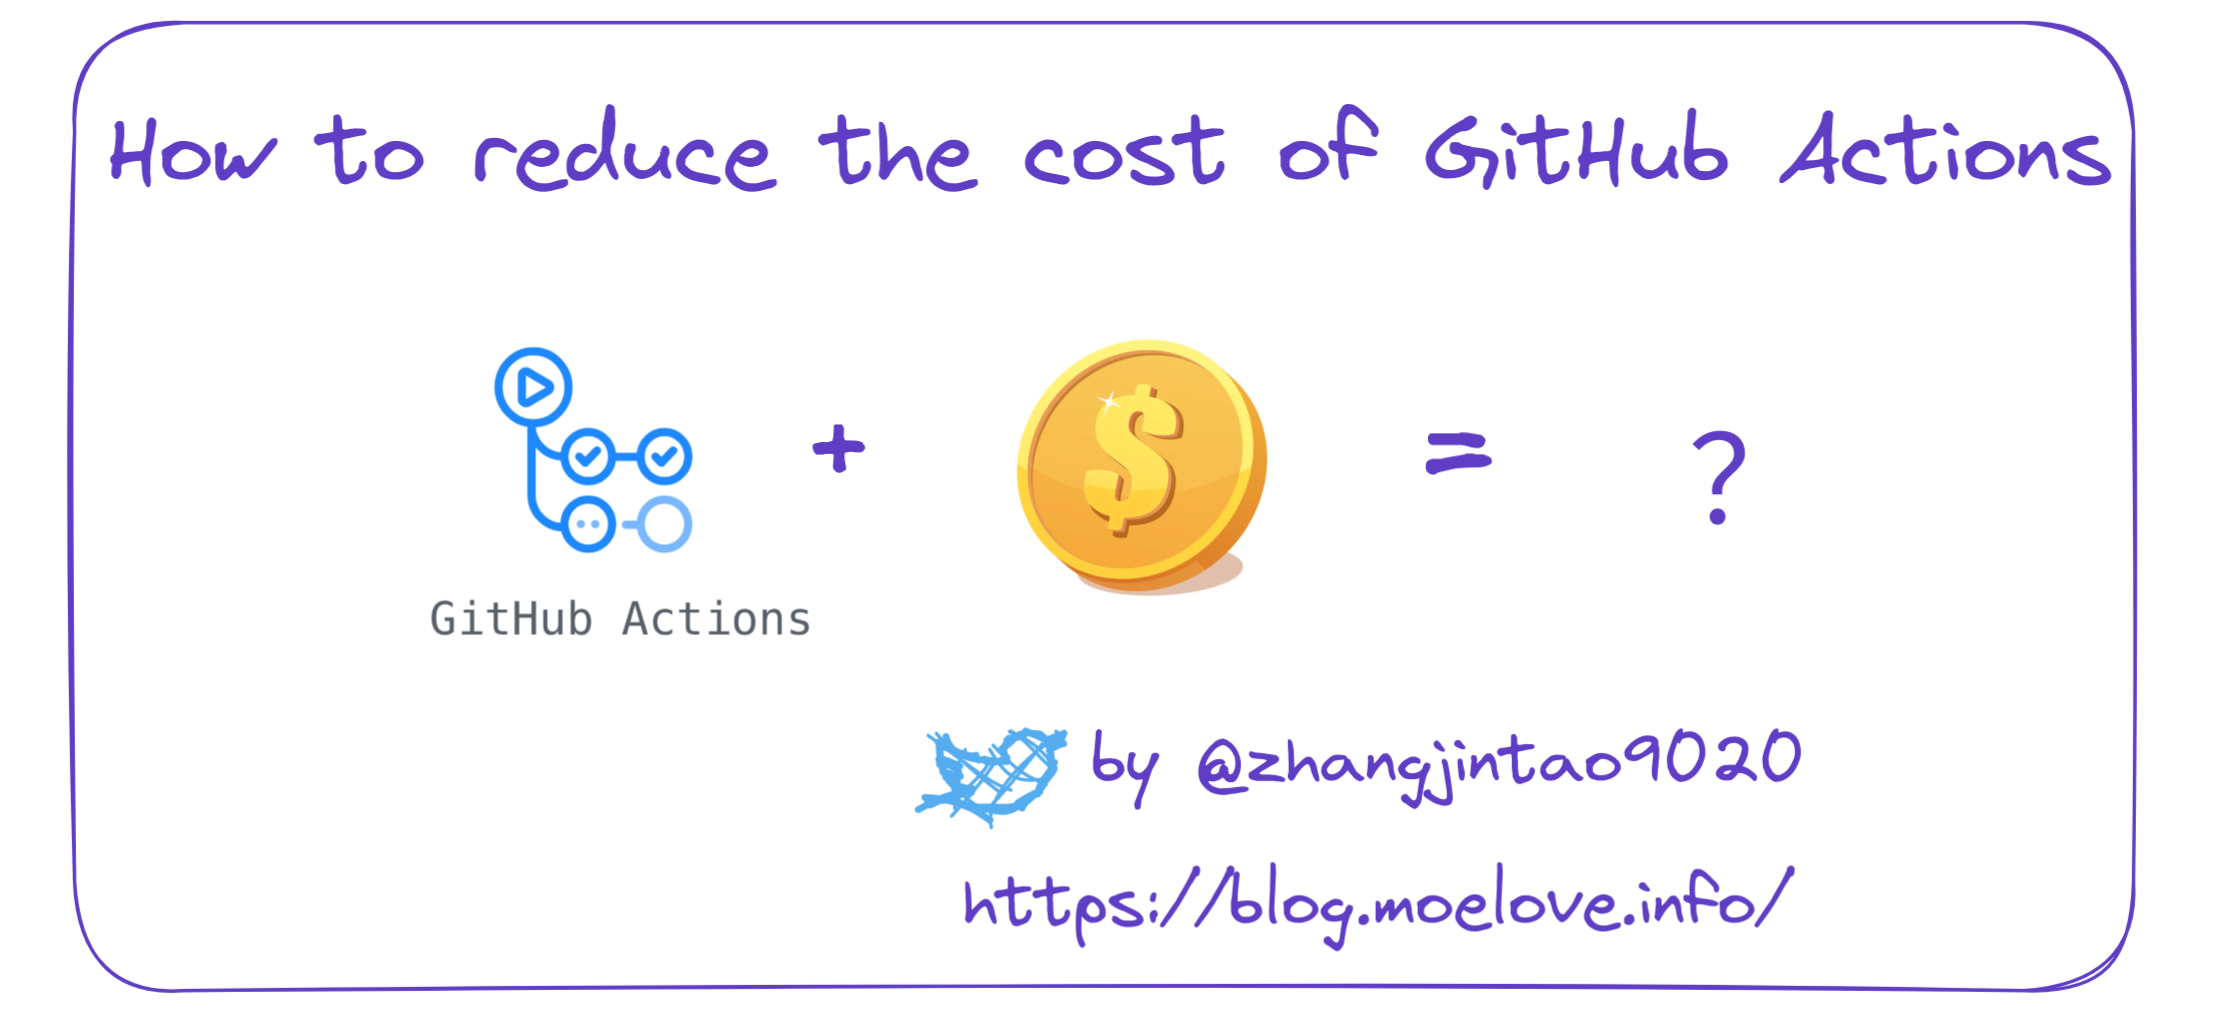 How to reduce the cost of GitHub Actions